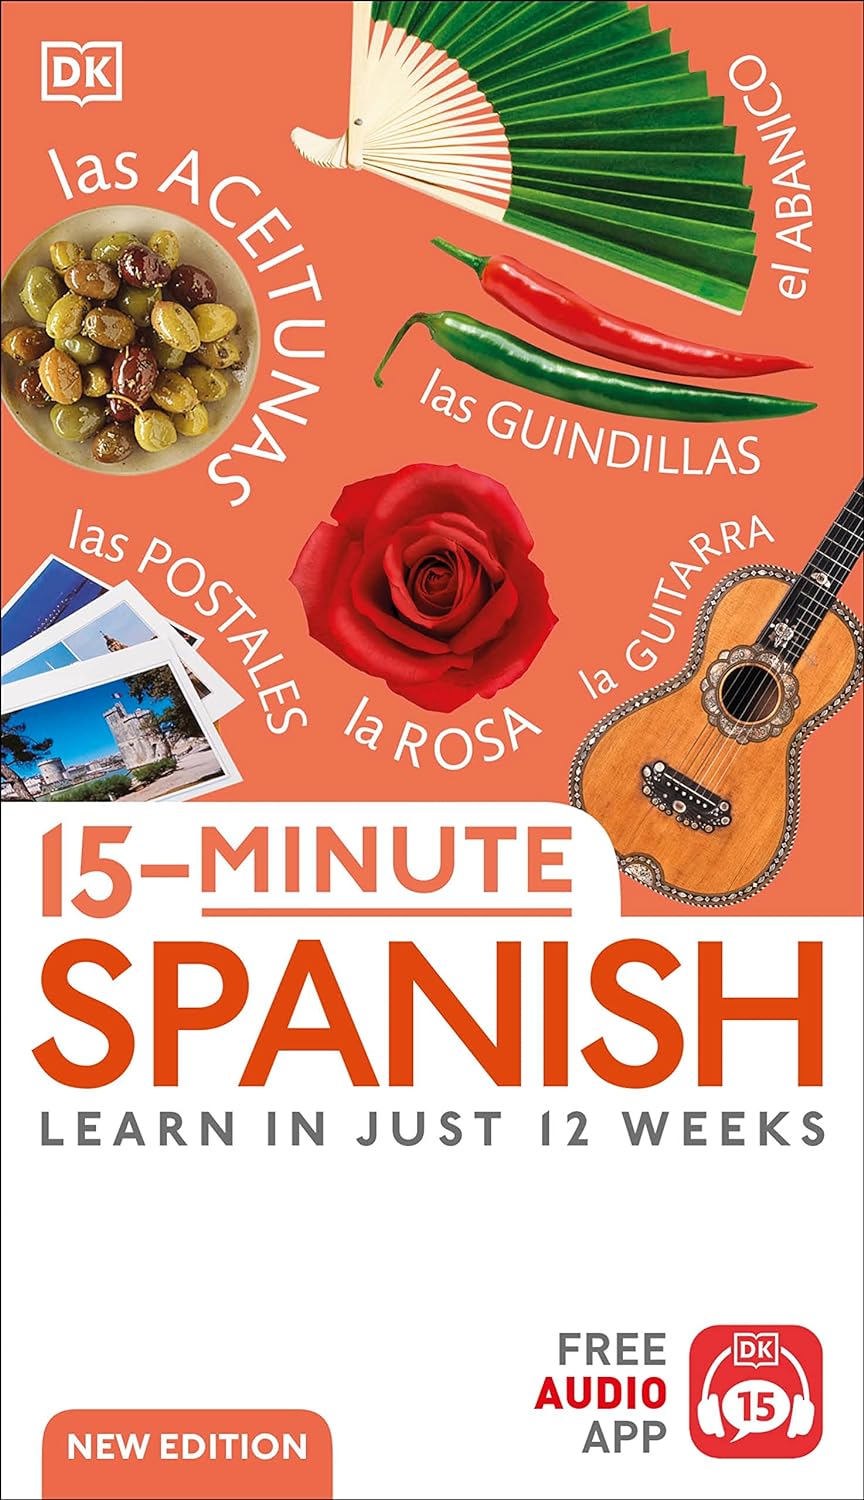 15-Minute Spanish Learn in Just 12 Weeks (DK 15-Minute Language Learning) (2ND ed.) - SureShot Books Publishing LLC